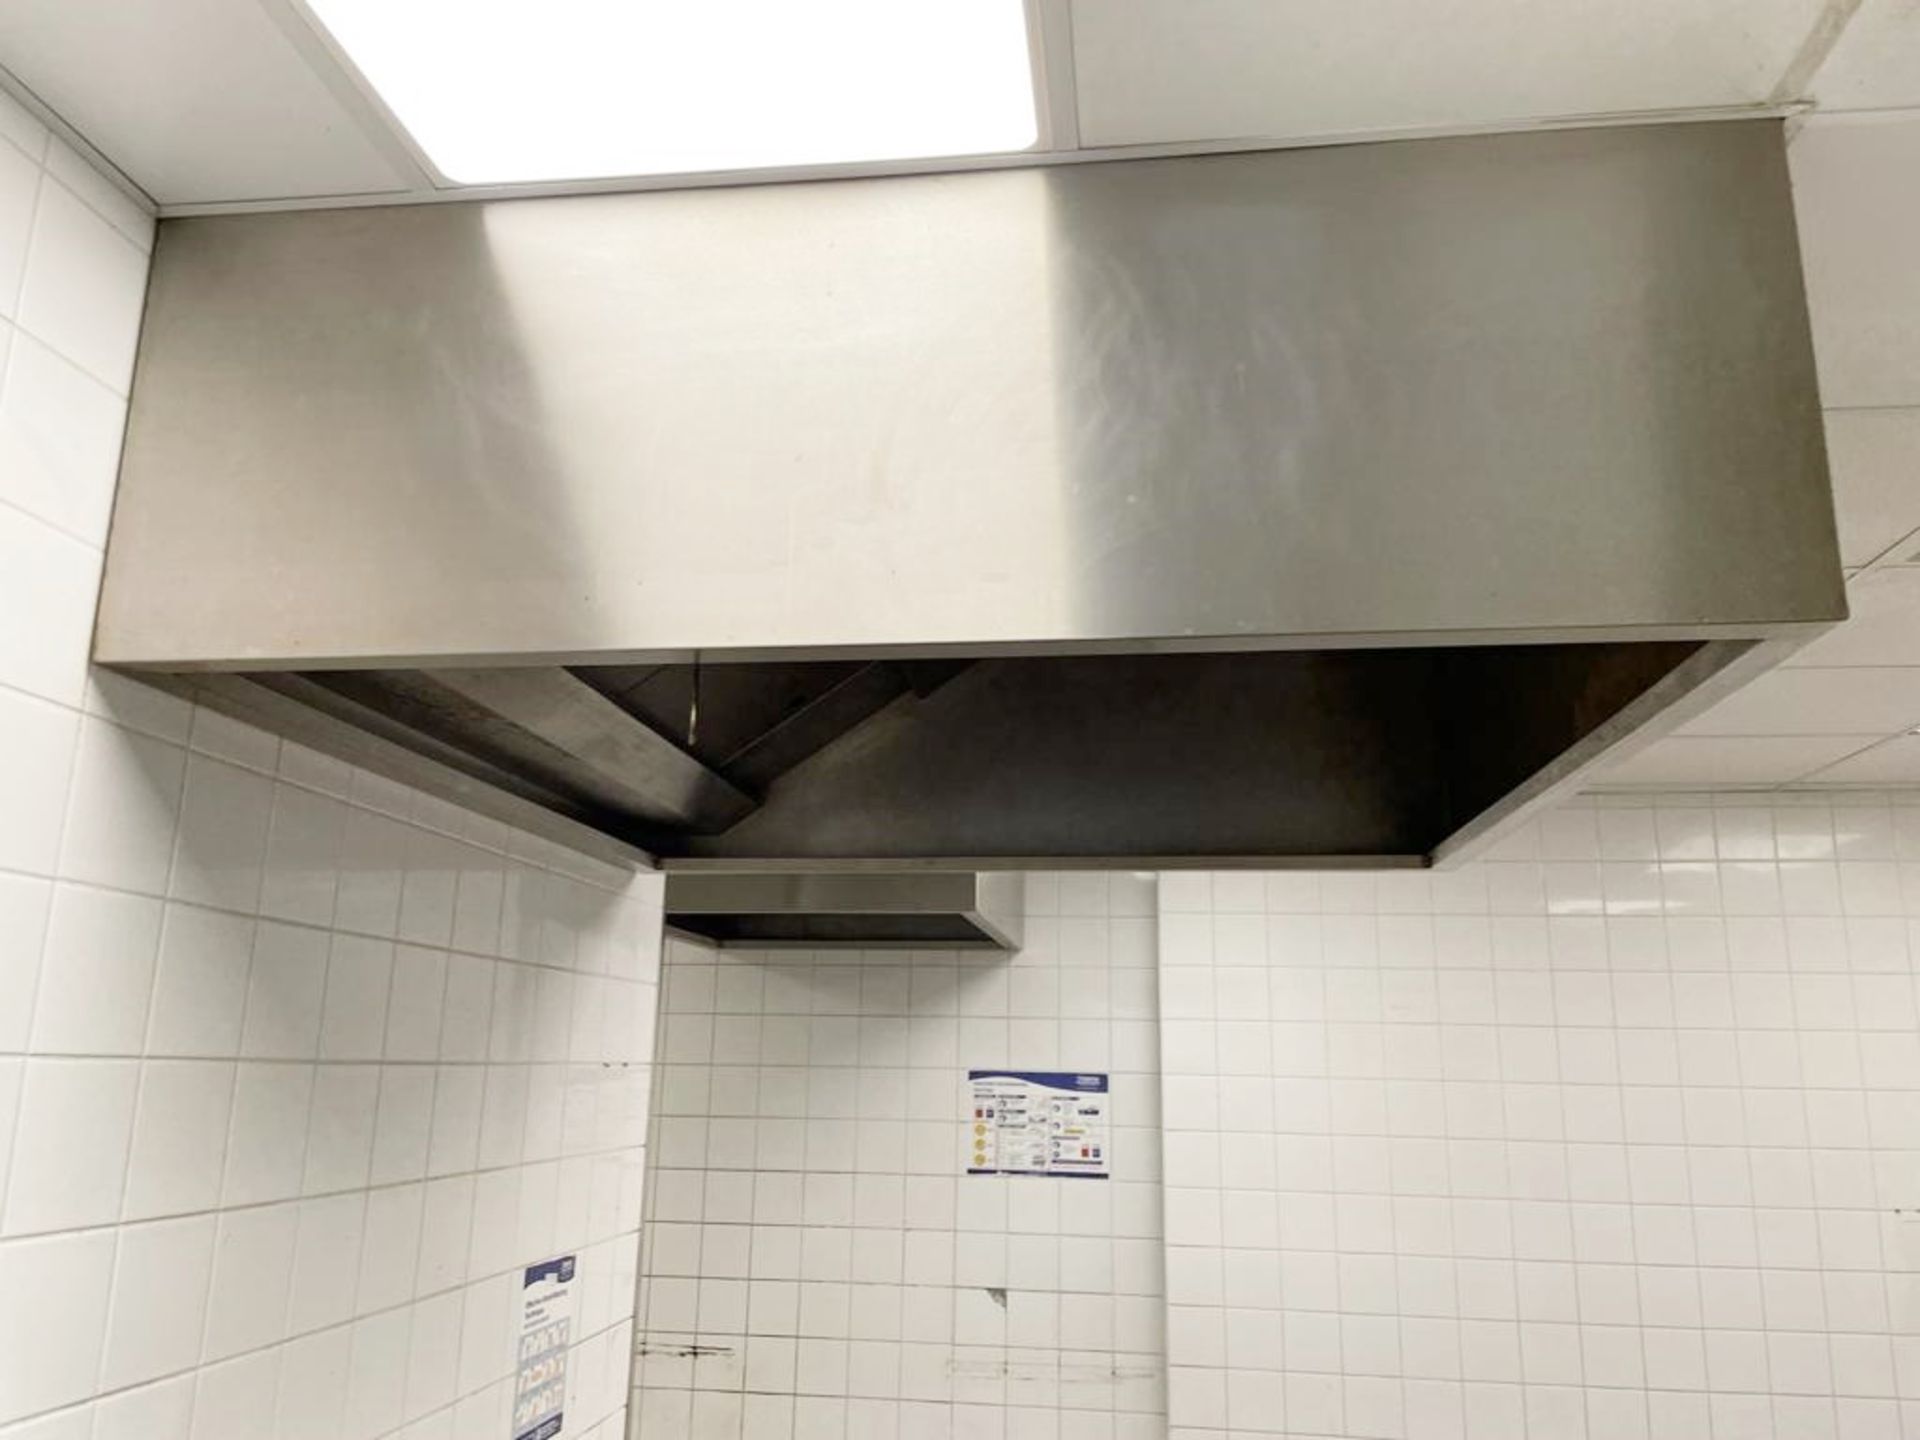 1 x Commercial Kitchen Extractor Canopy With Filters - Stainless Steel - Dimension: H50 x W150 x - Image 5 of 5